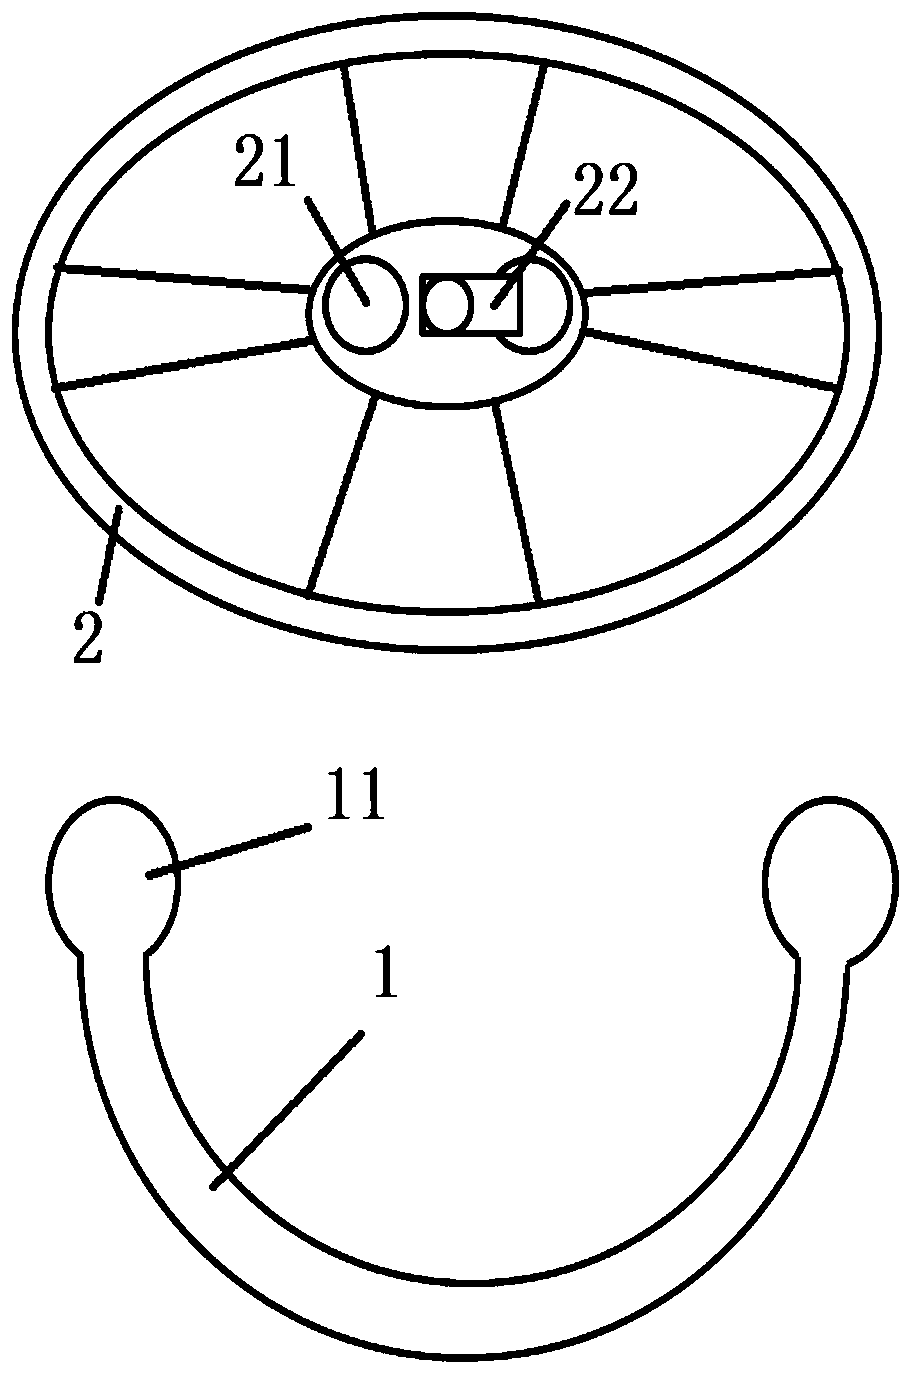 A rotary muscle stretching device and method